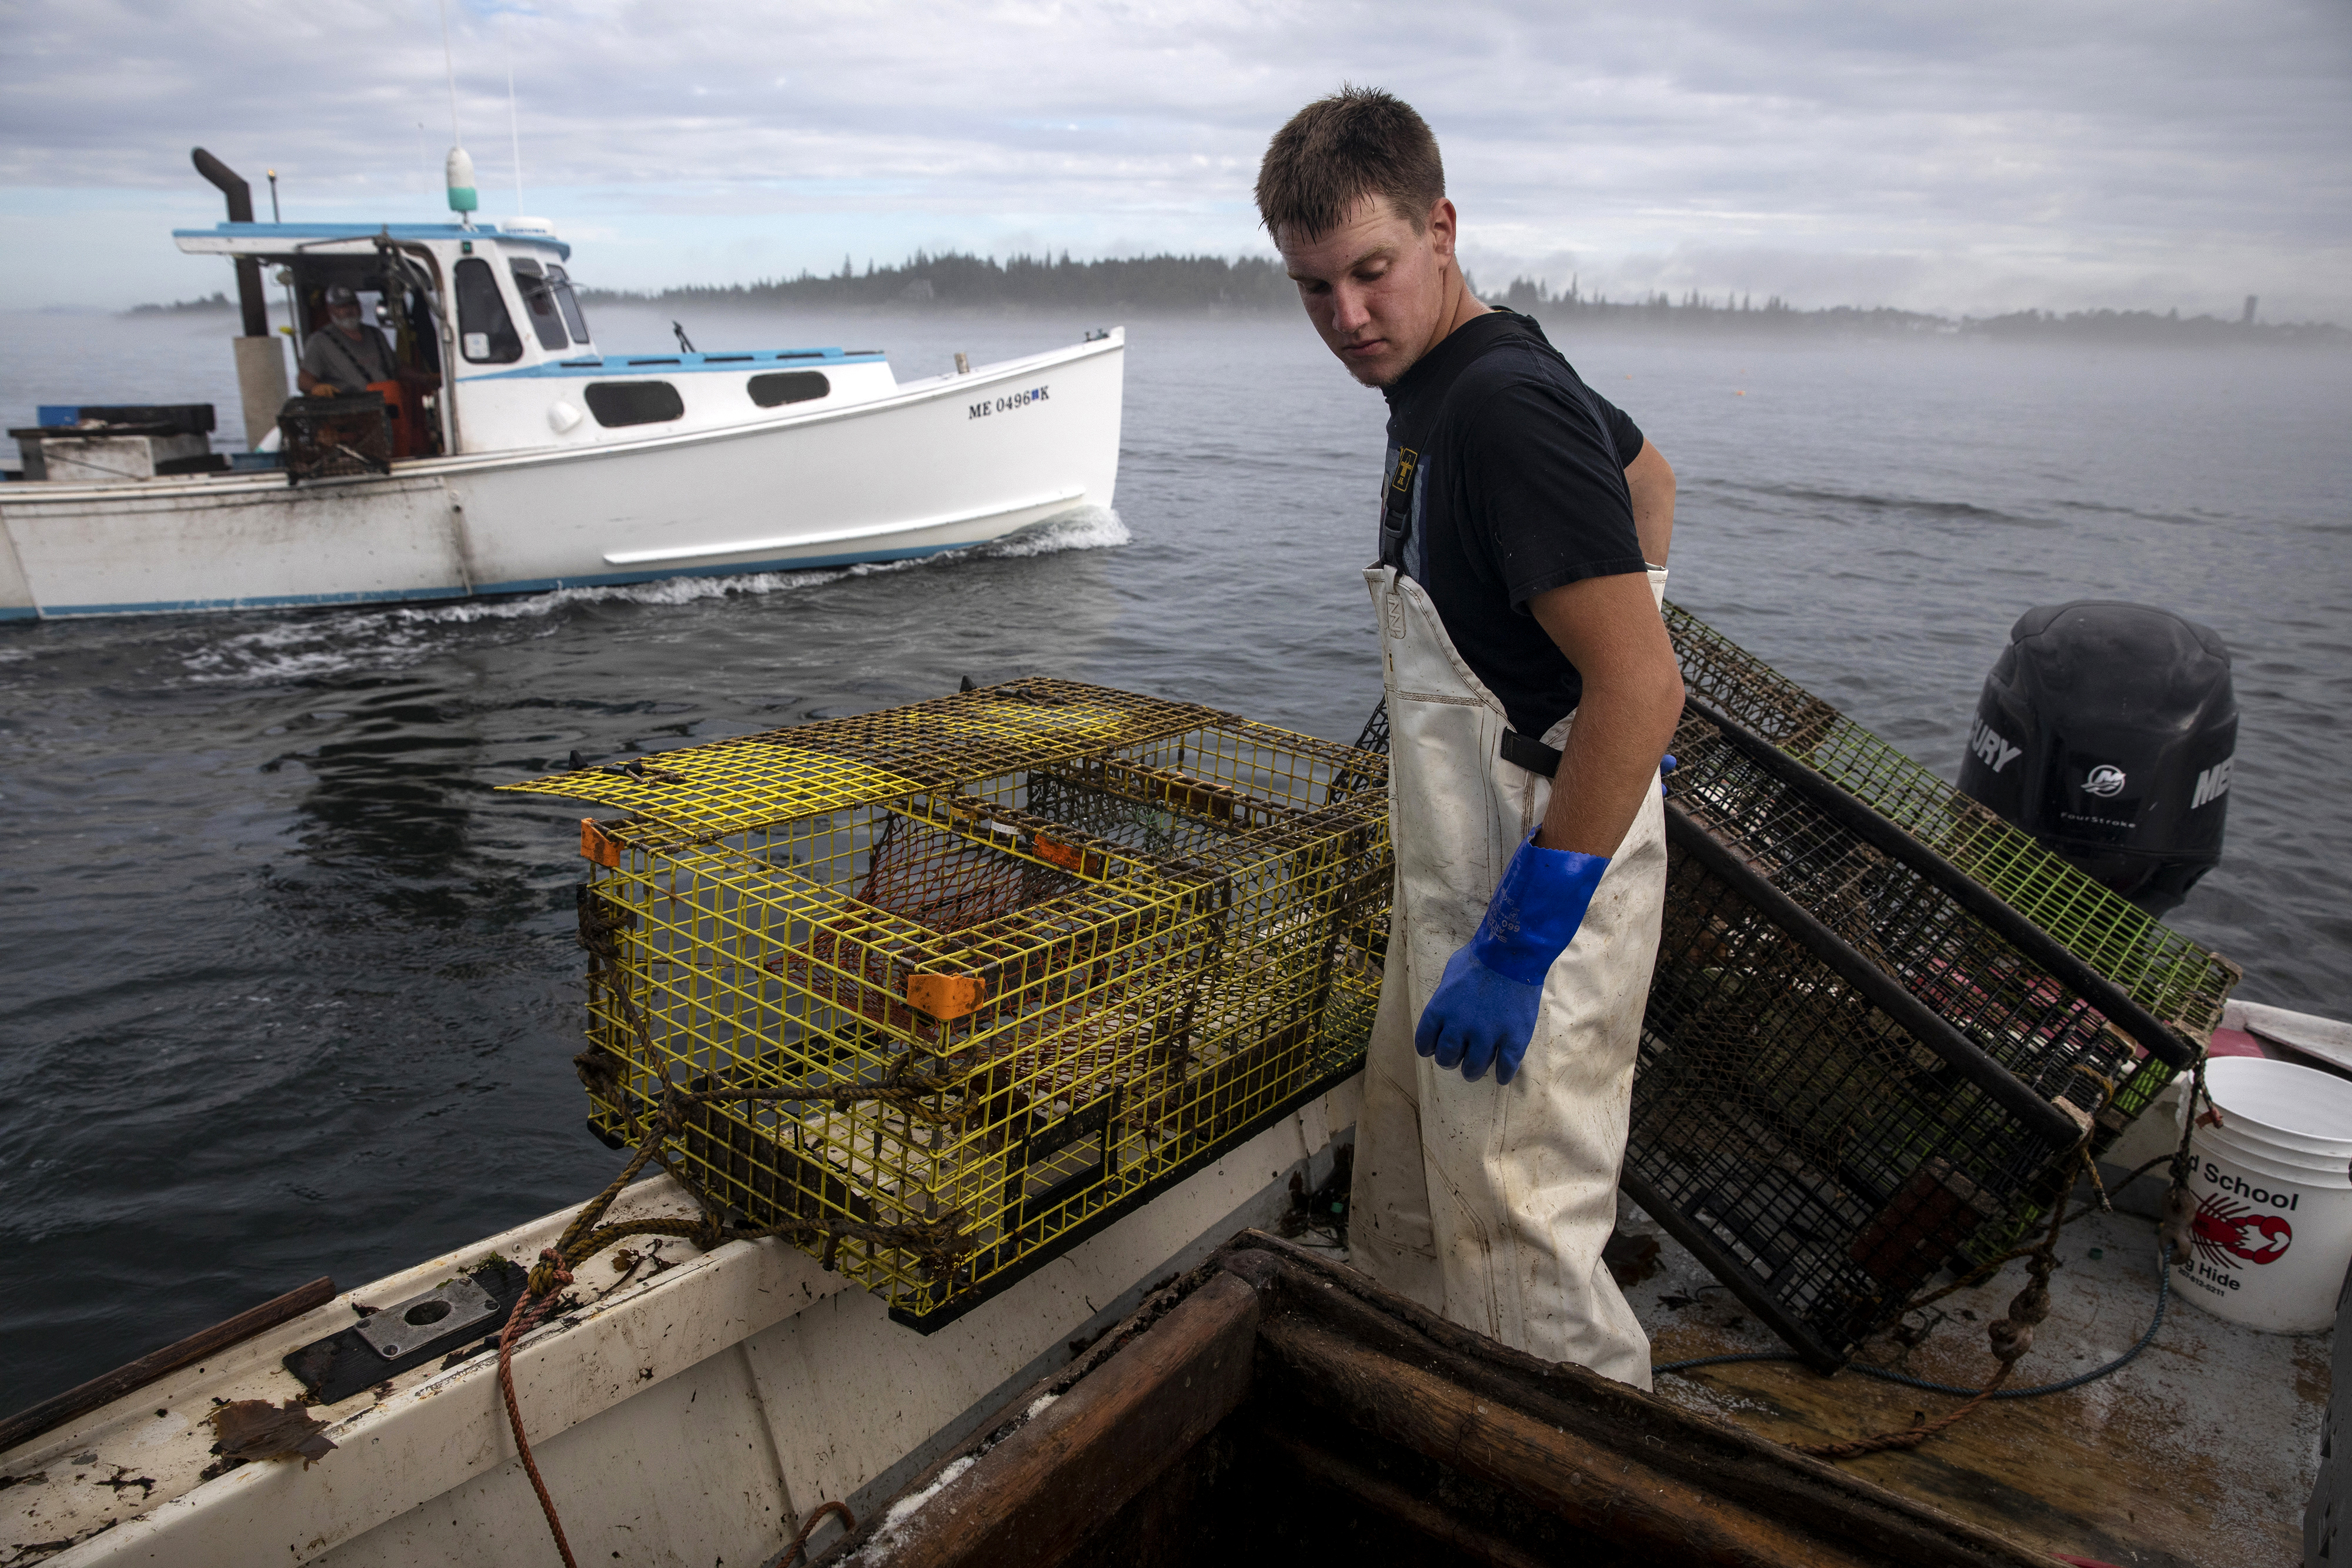 An older lobsterman passed by Tanner Lazaro as he hauled up his traps in his boat, Used N Abused, on Aug. 24. During the summer Tanner hauled his own traps on whatever days his mentor Frankie Thompson or another lobsterman didn't need his help.